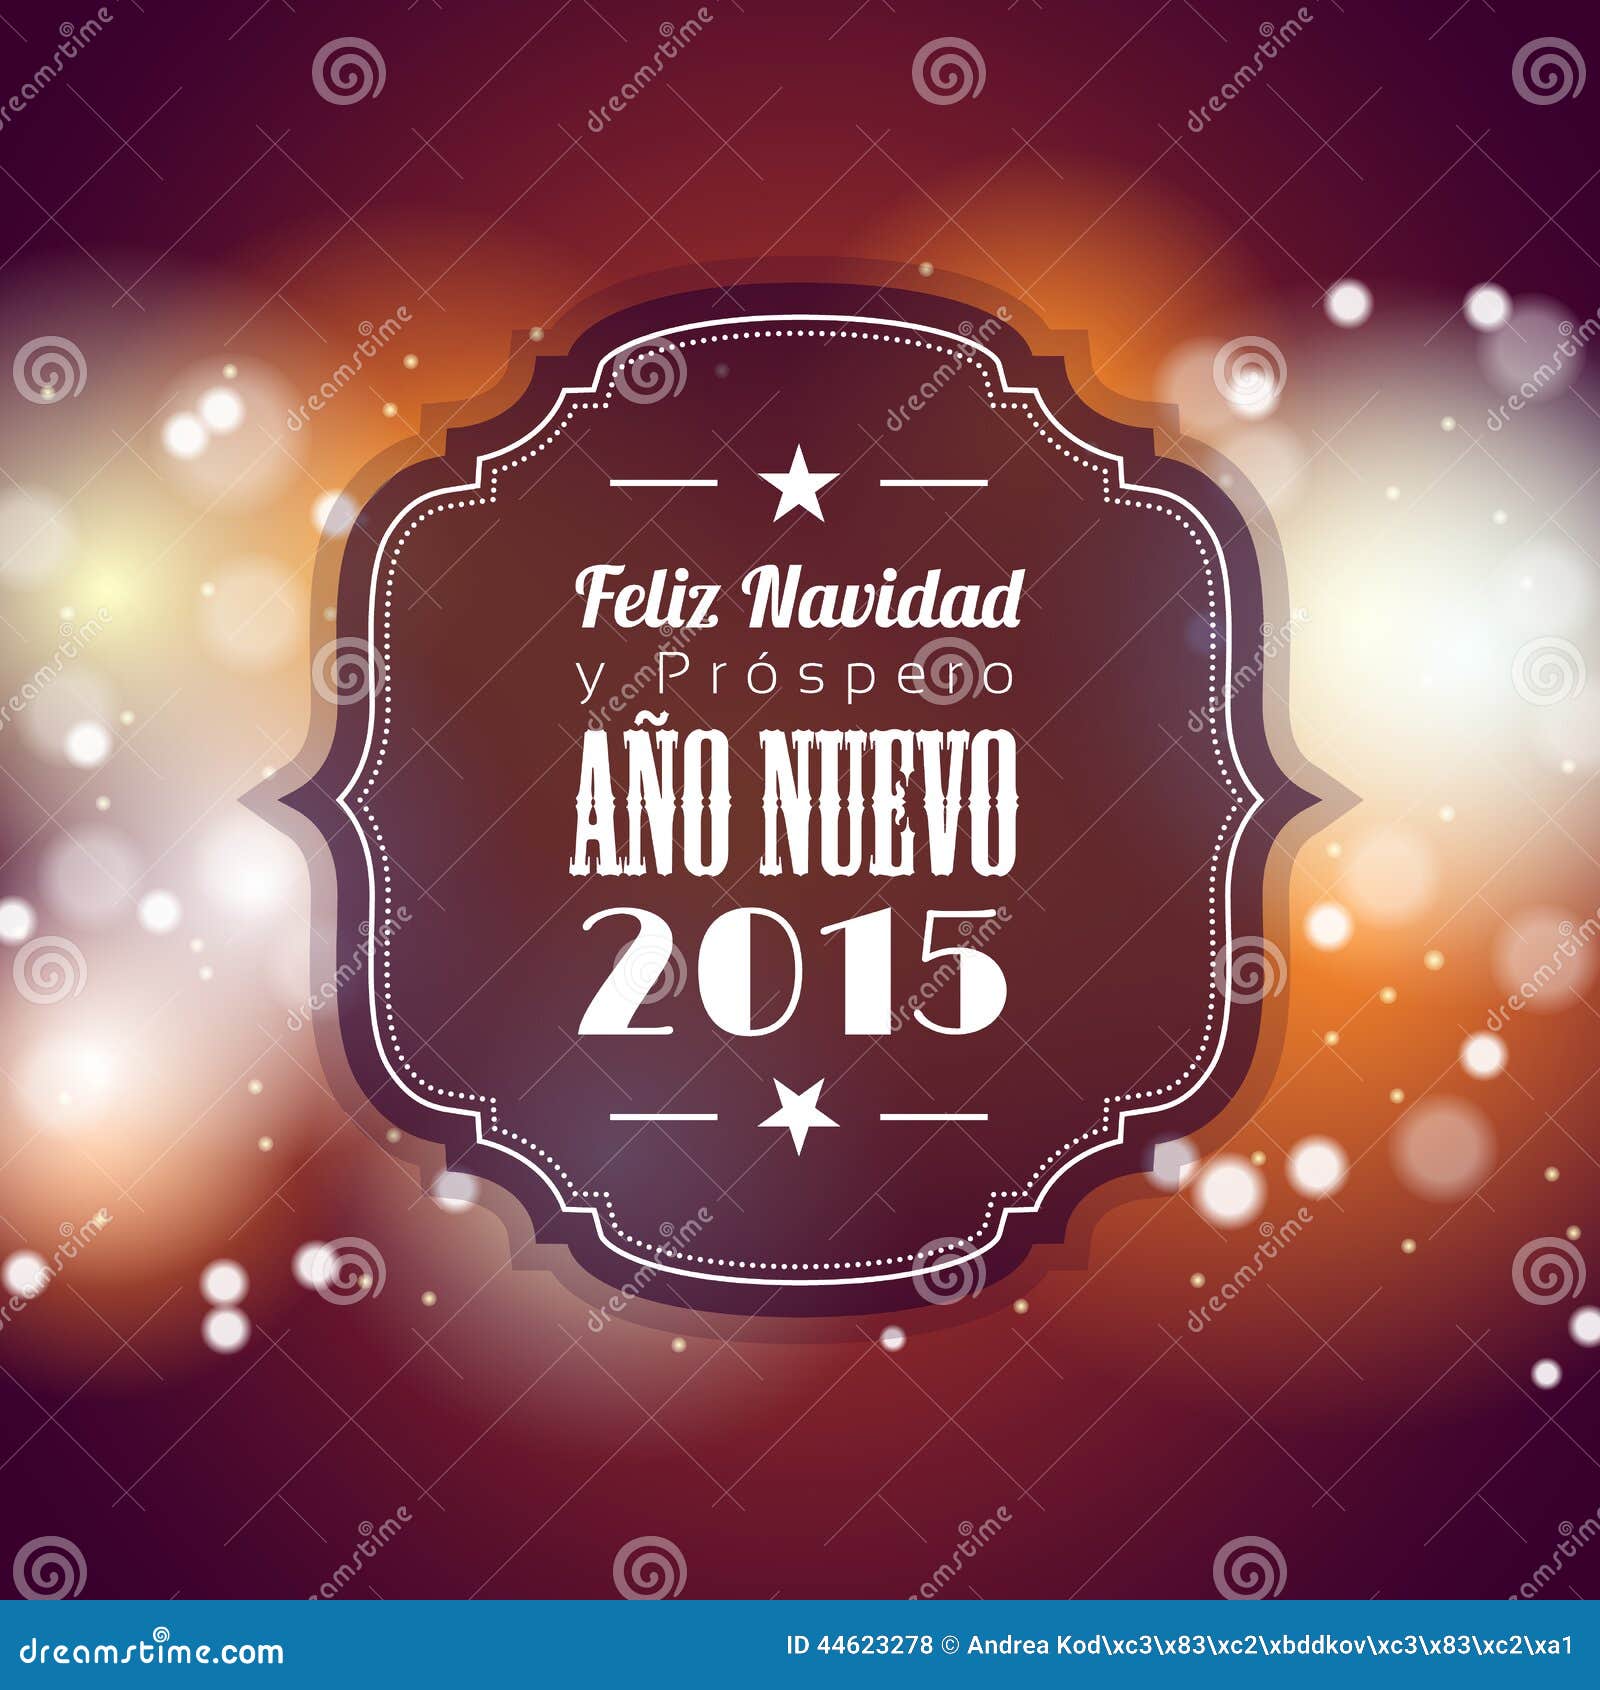 card with text Merry Christmas and a Happy New Year in spanish ...